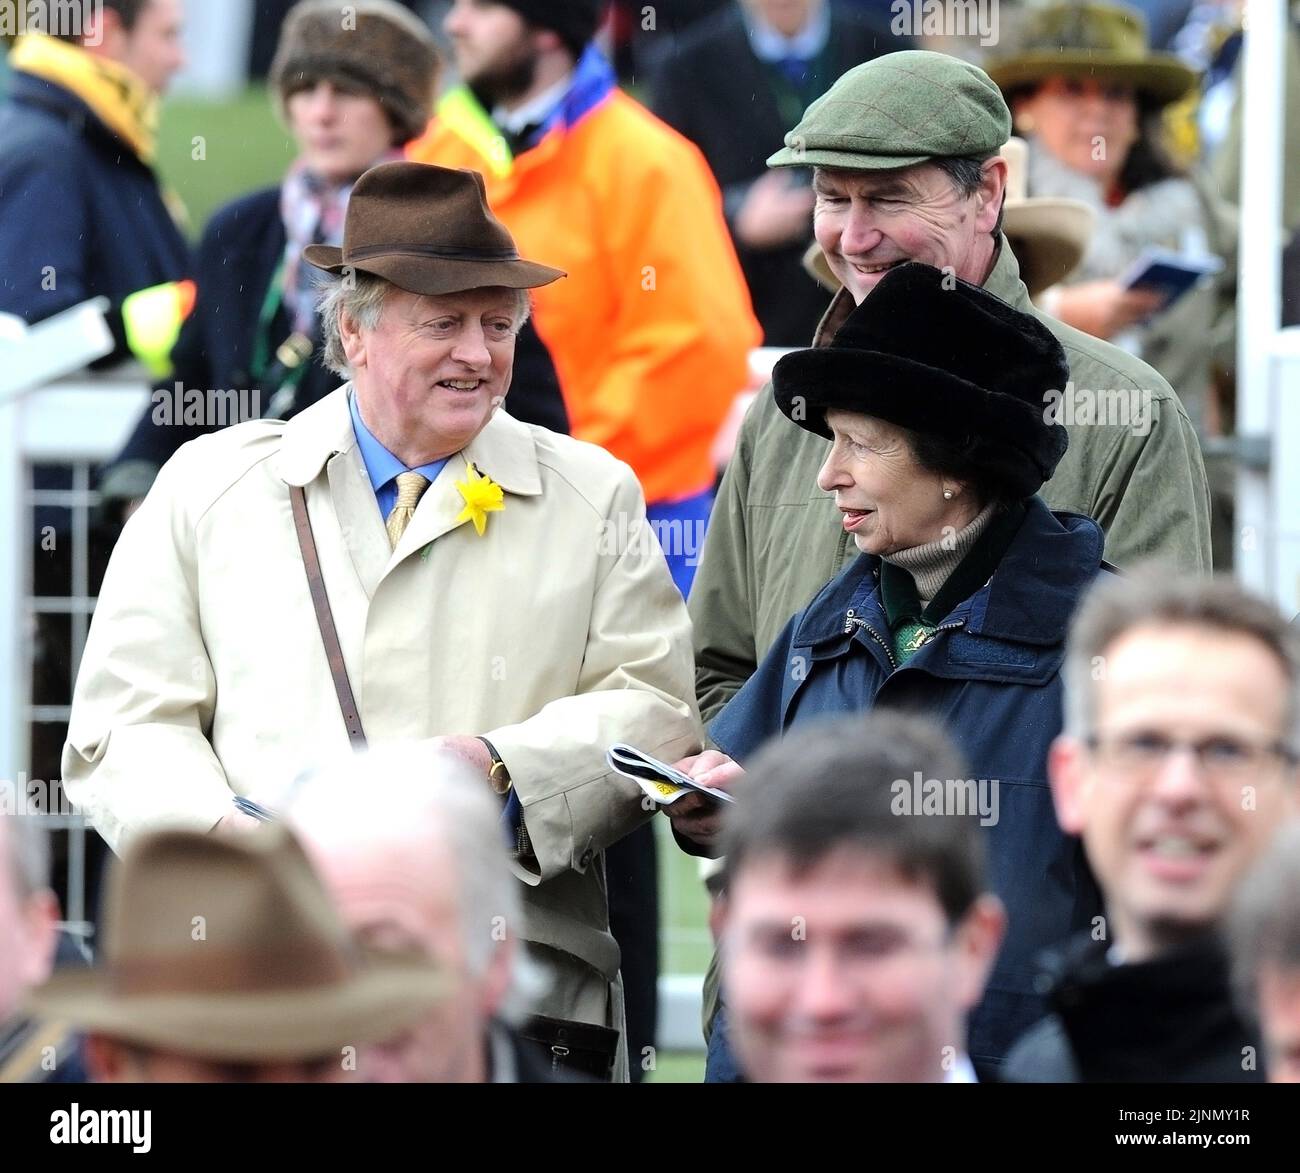 Cheltenham Gold Cup Day  Princess Royal & Andrew Parker-Bowles 15.03.13  RACE3 Stock Photo